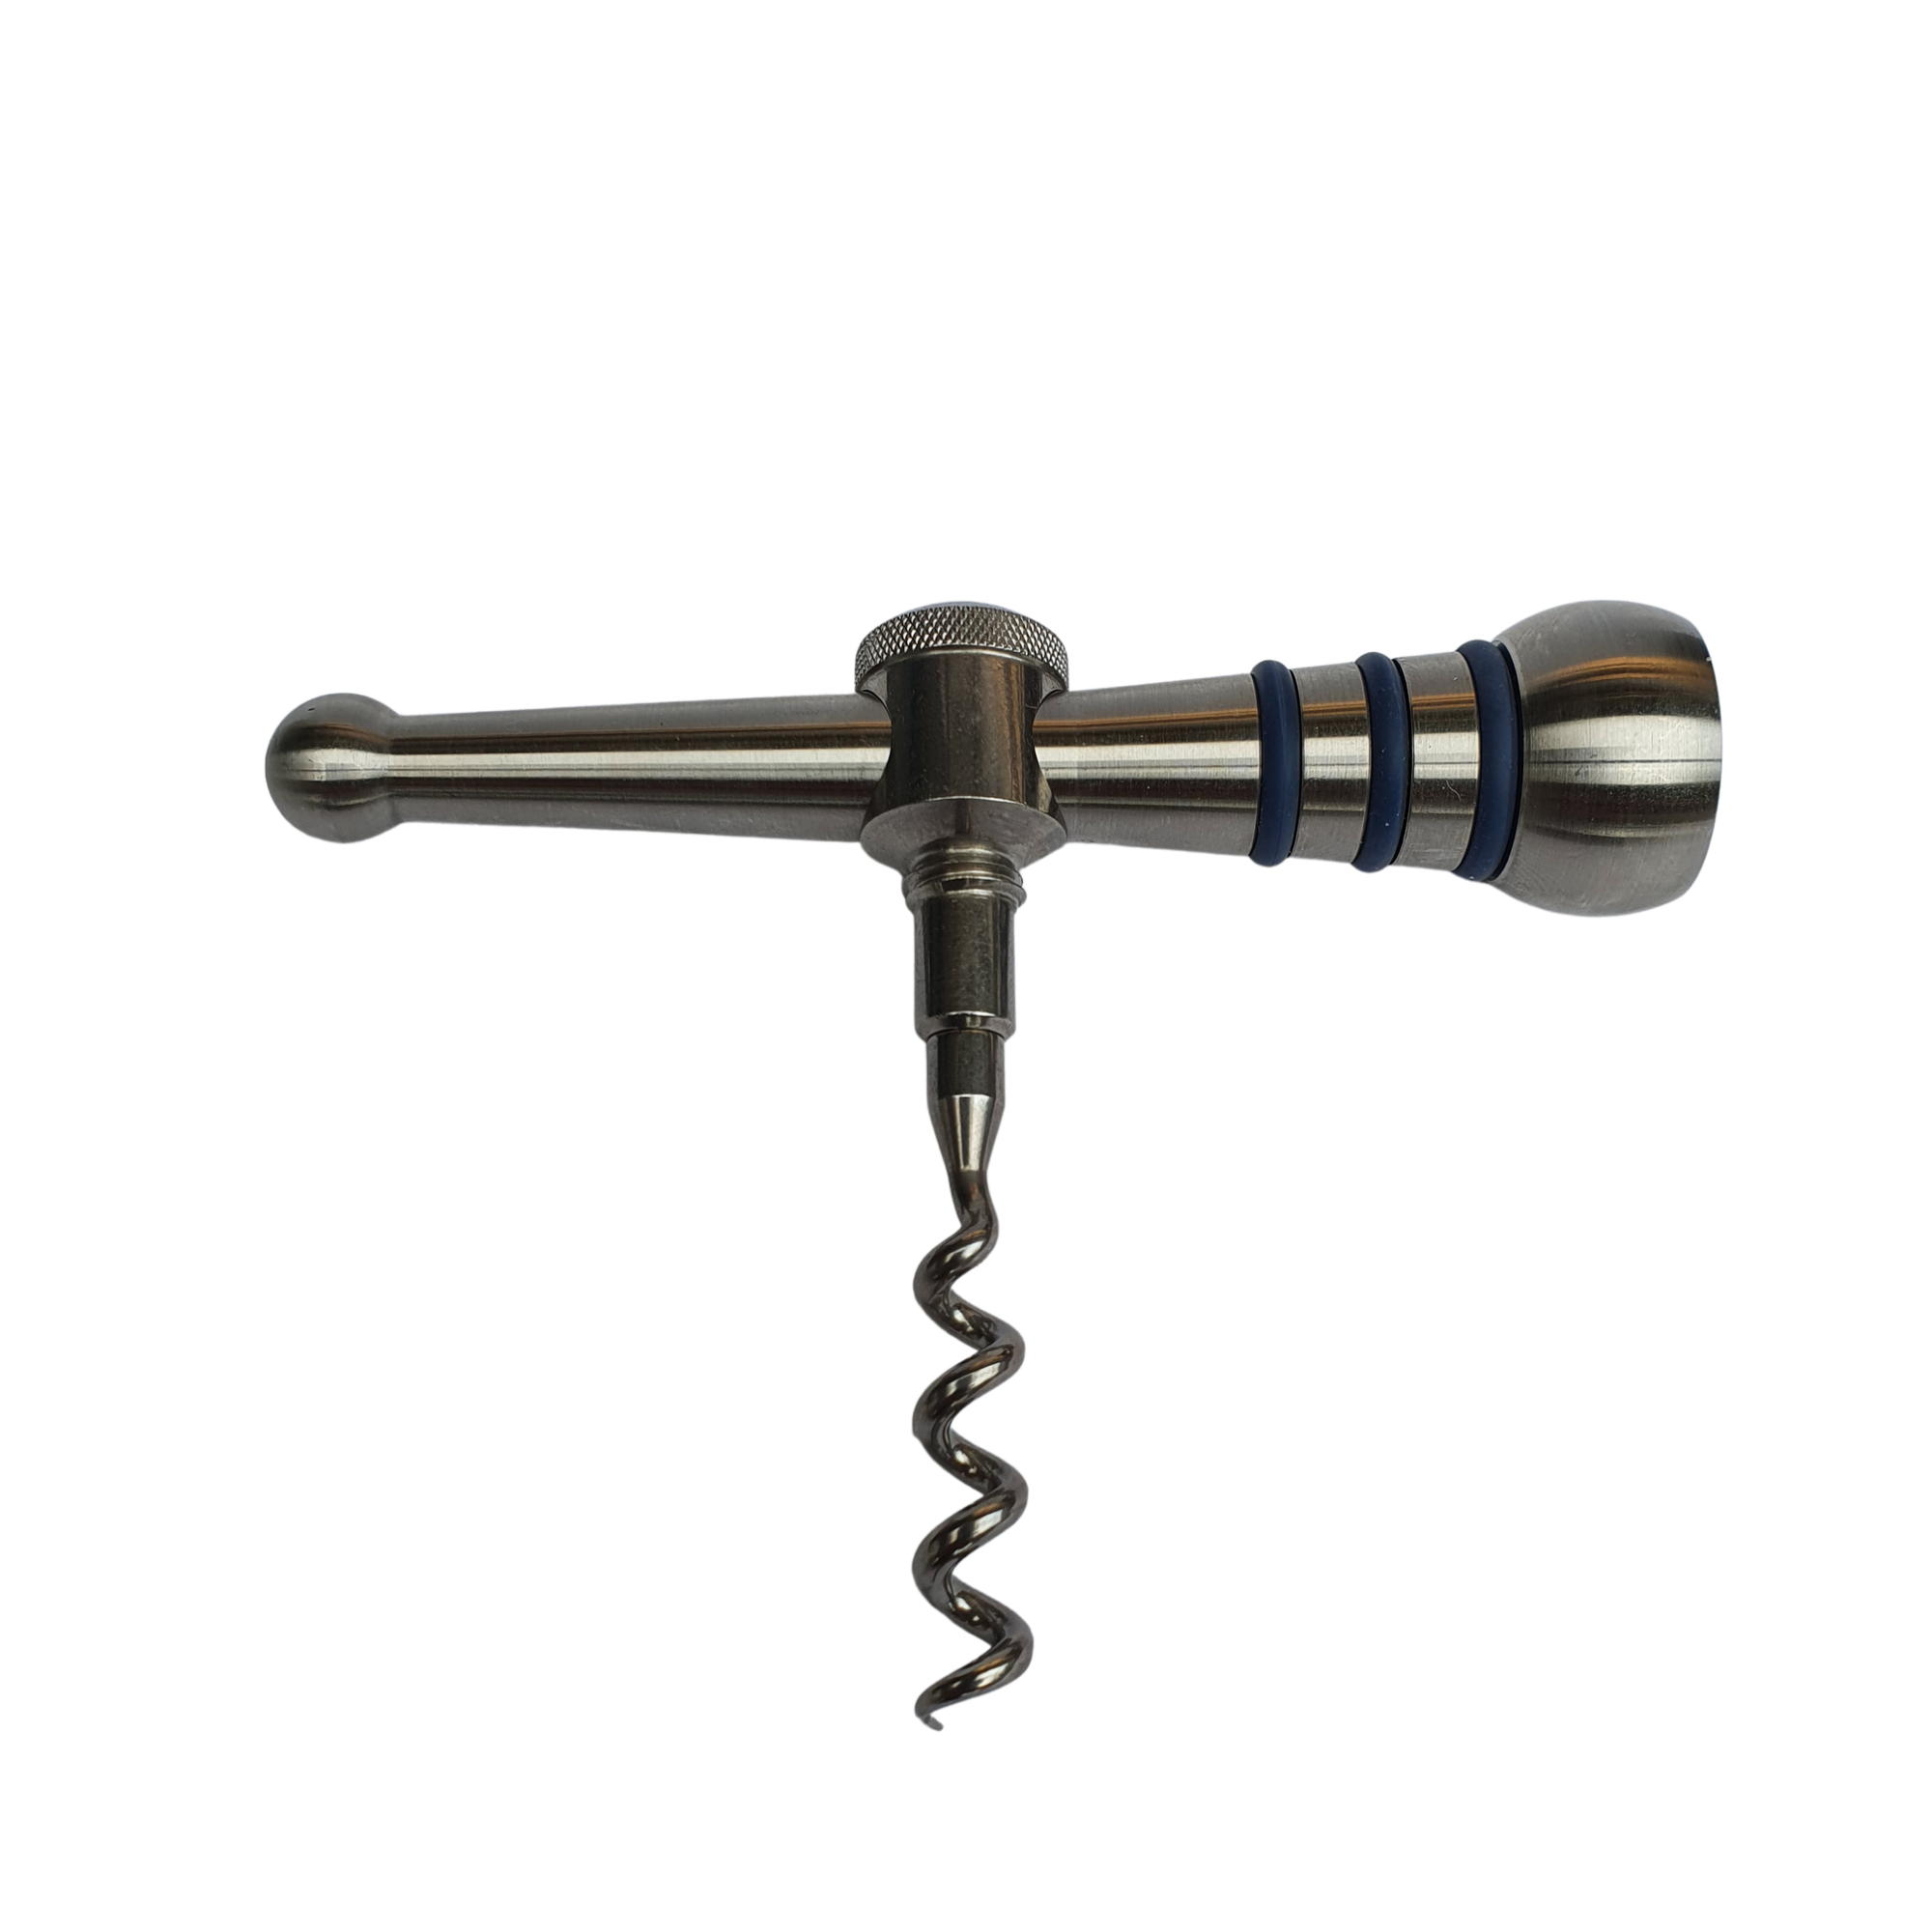 Integra - Wine Bottle Stopper with Integrated Corkscrew